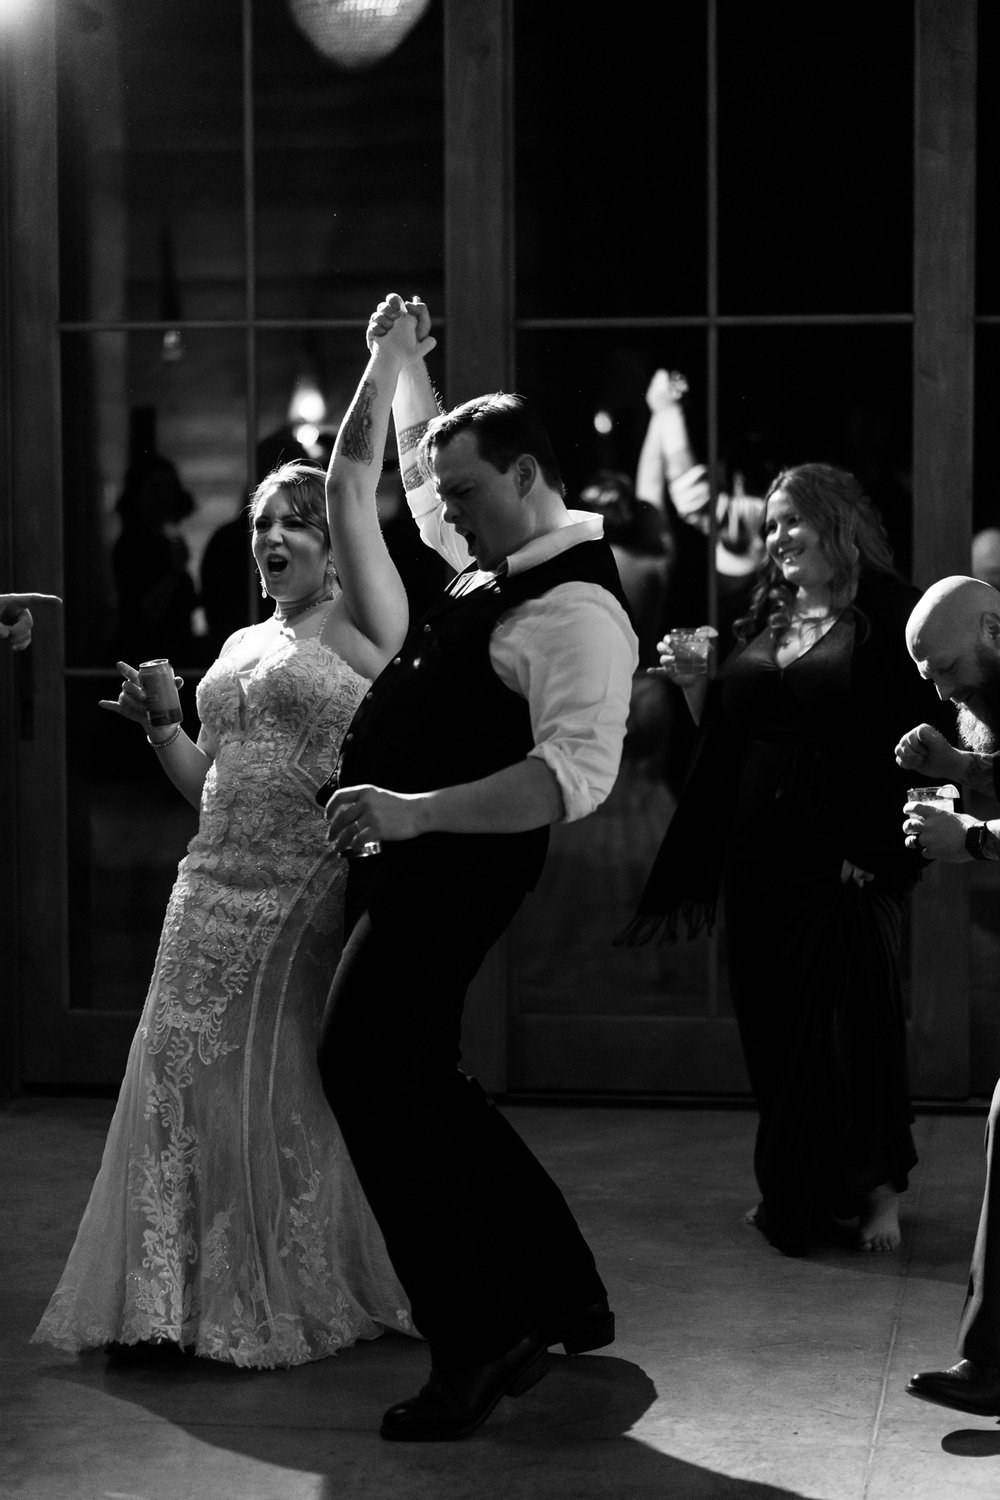 Excited newlyweds dance the night away